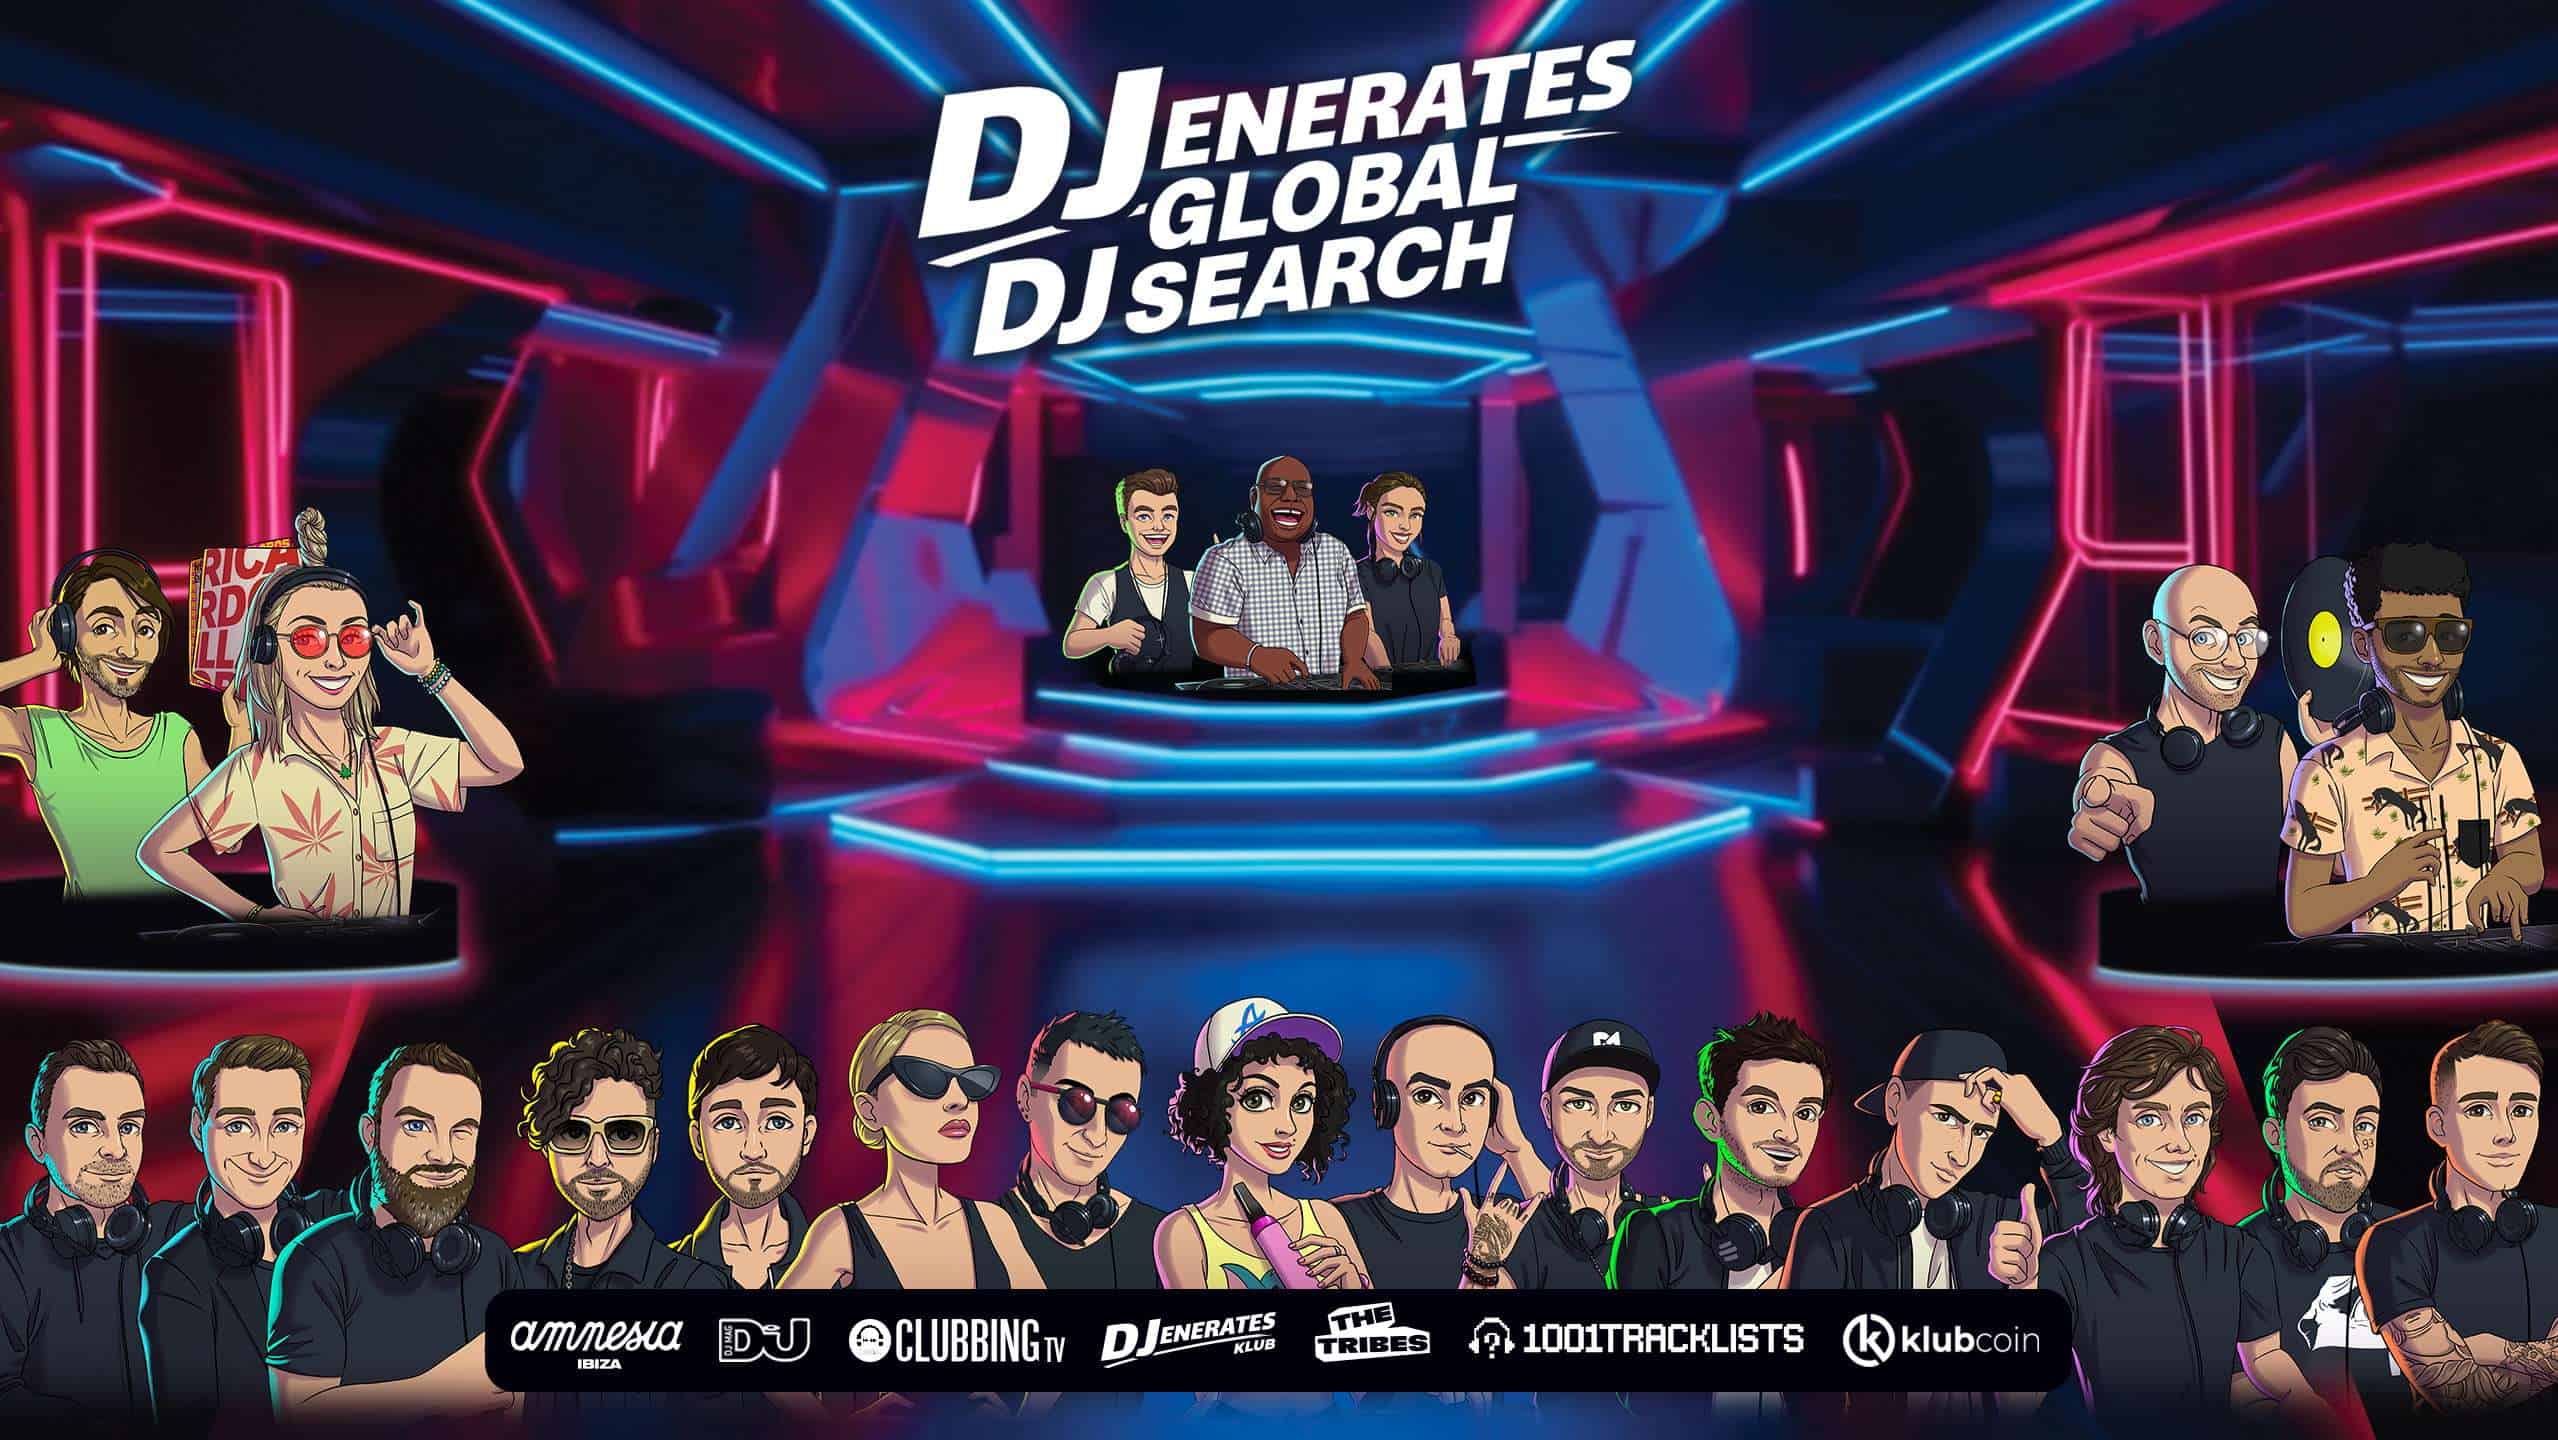 Amnesia Ibiza set to host winner of KlubCoin’s “DJenerates DJ Global Search” competition